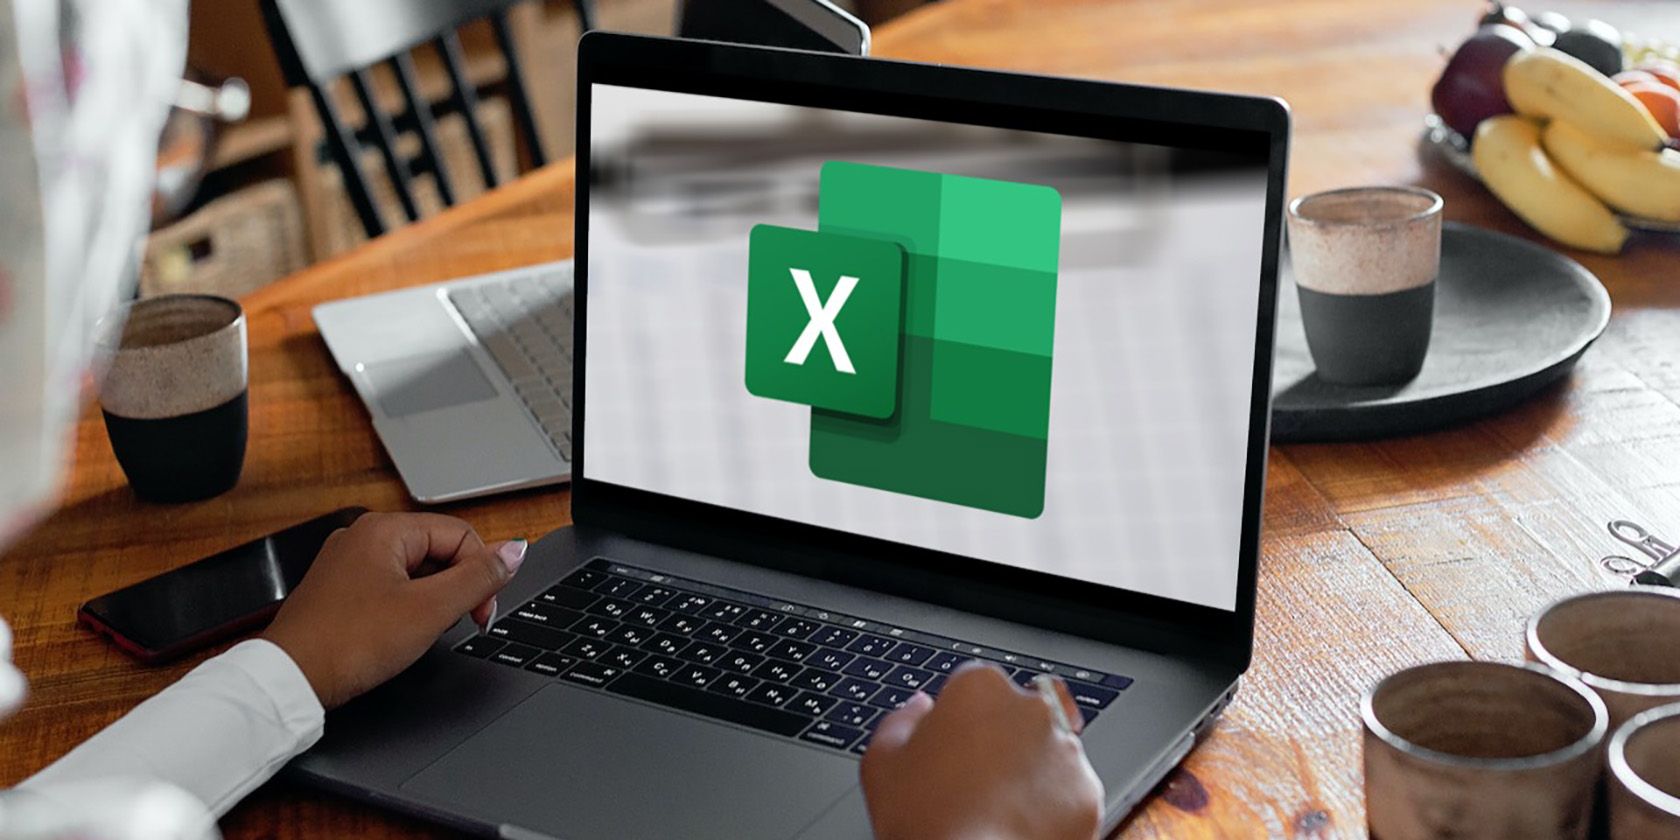 Excel logo displayed on a latop